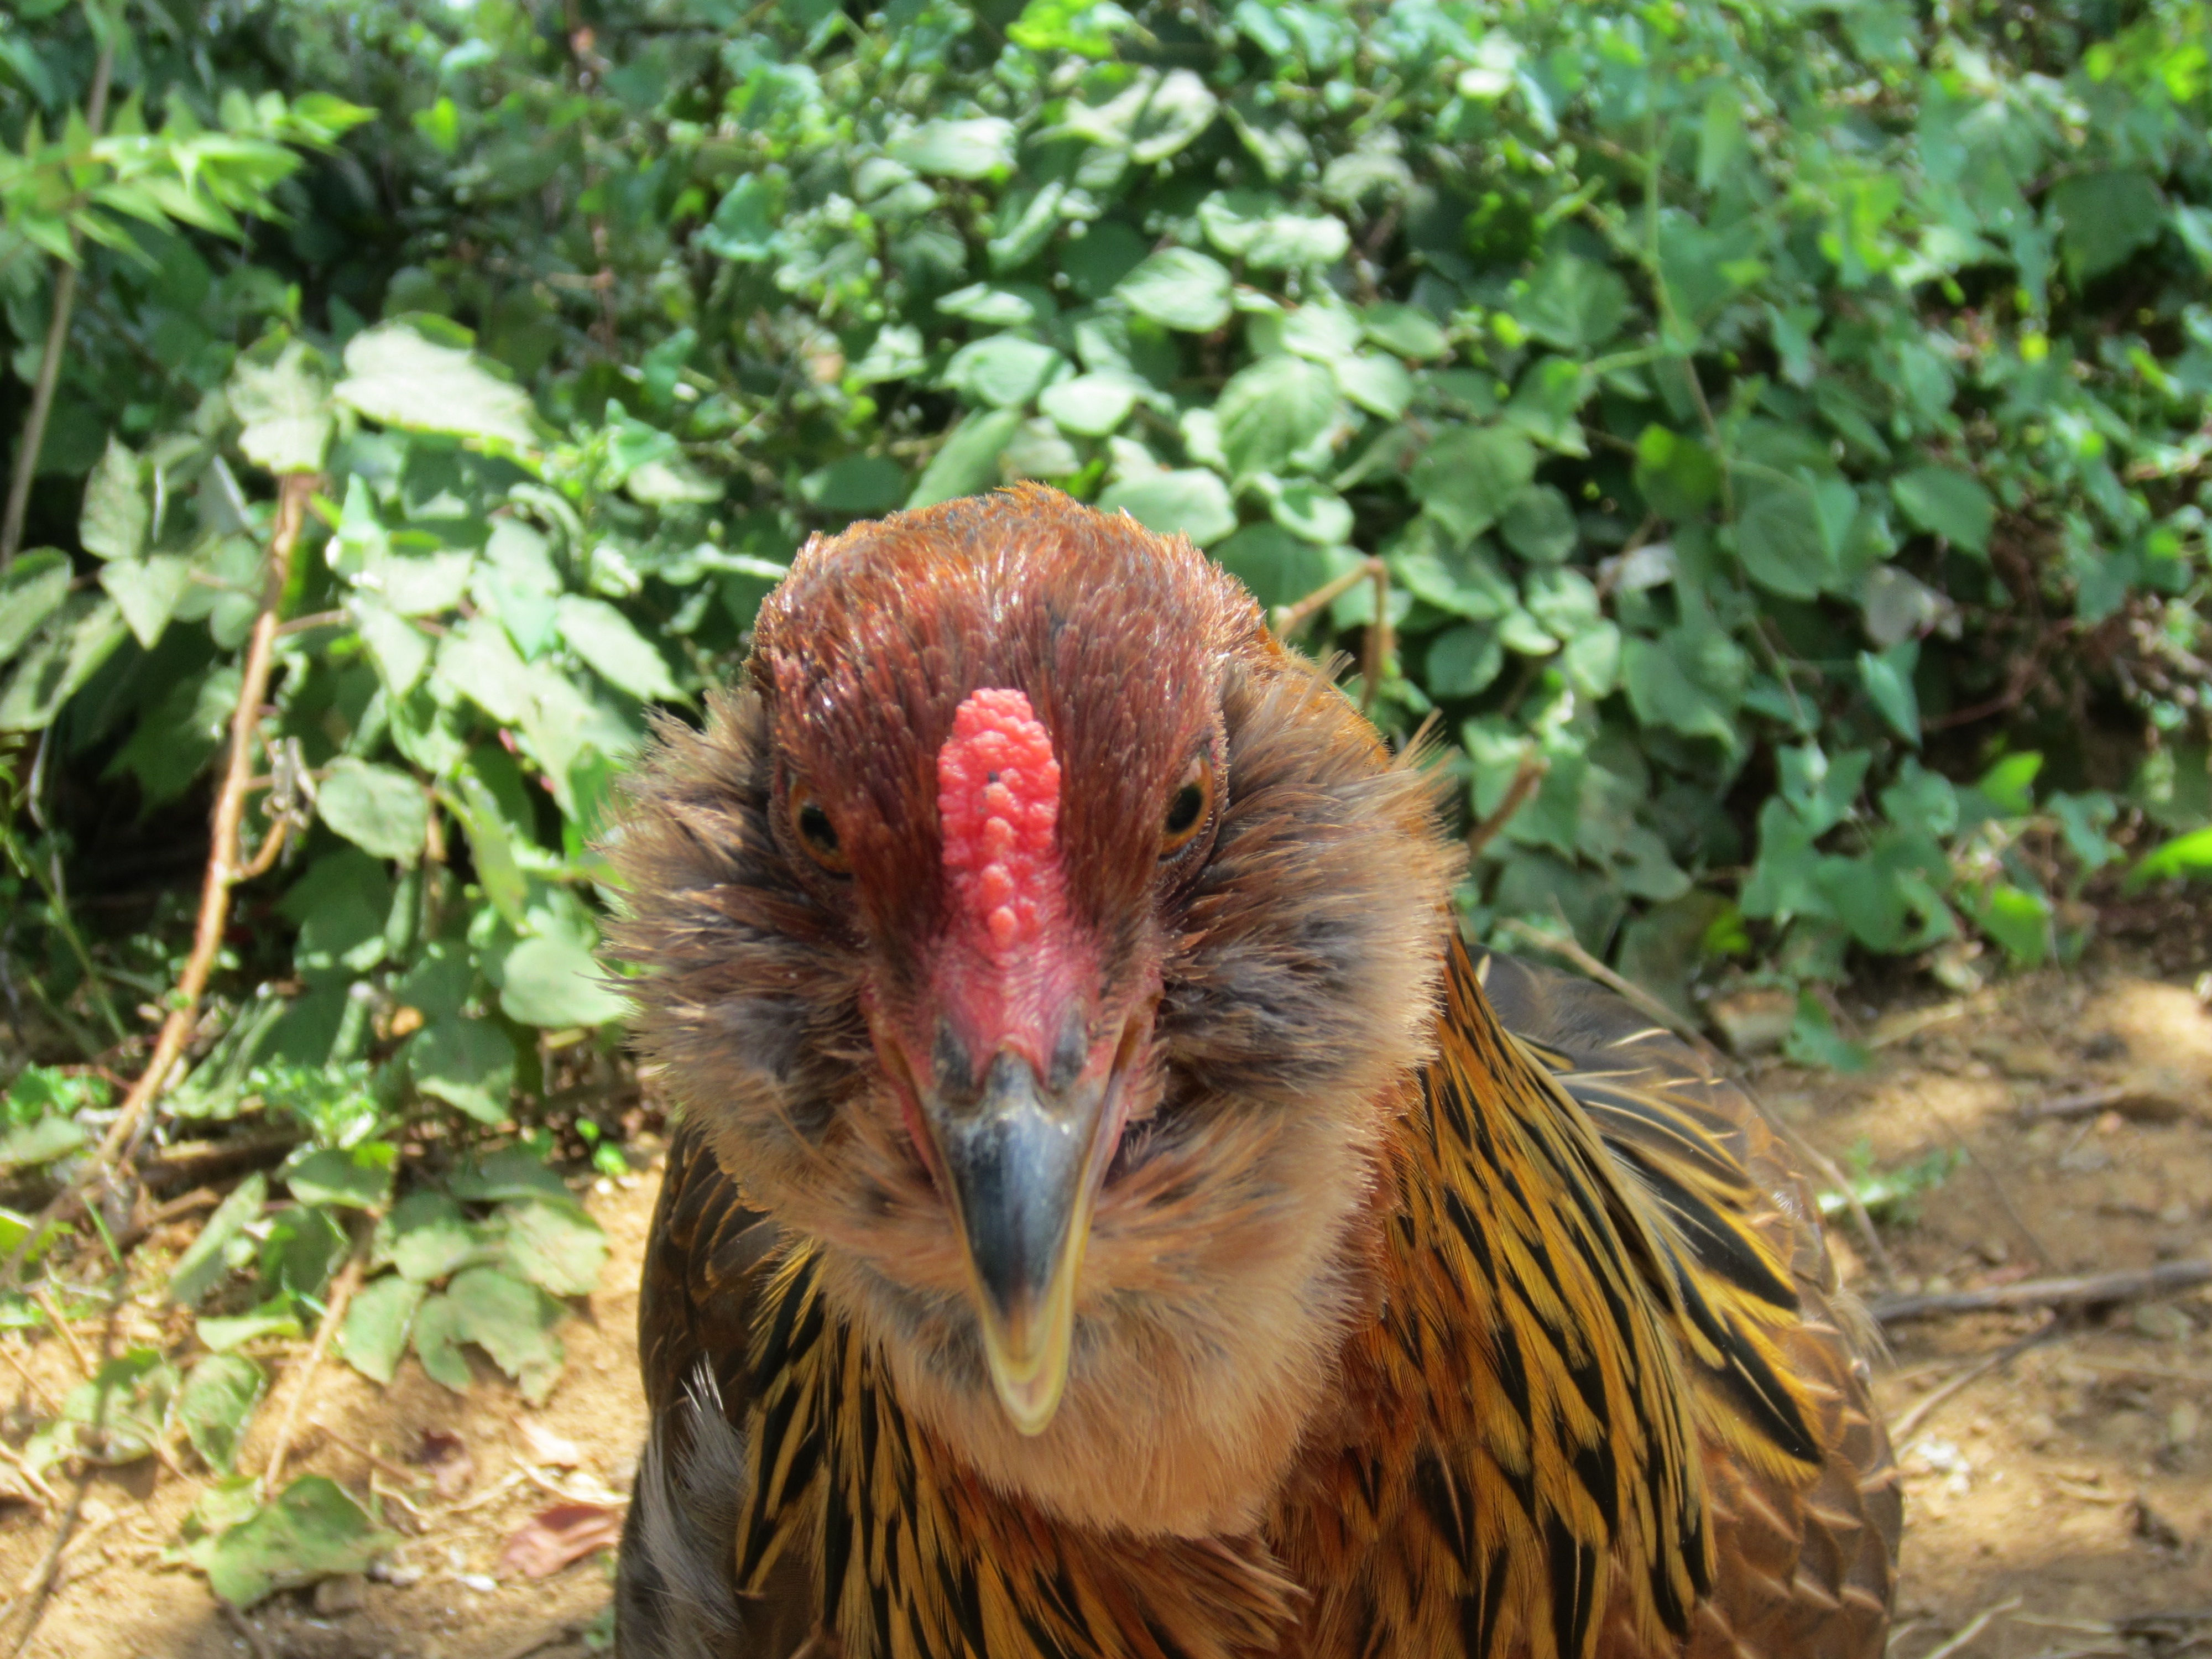 Lucy, our Americauna hen. She is very sweet and cute, but doesn't much like being held.